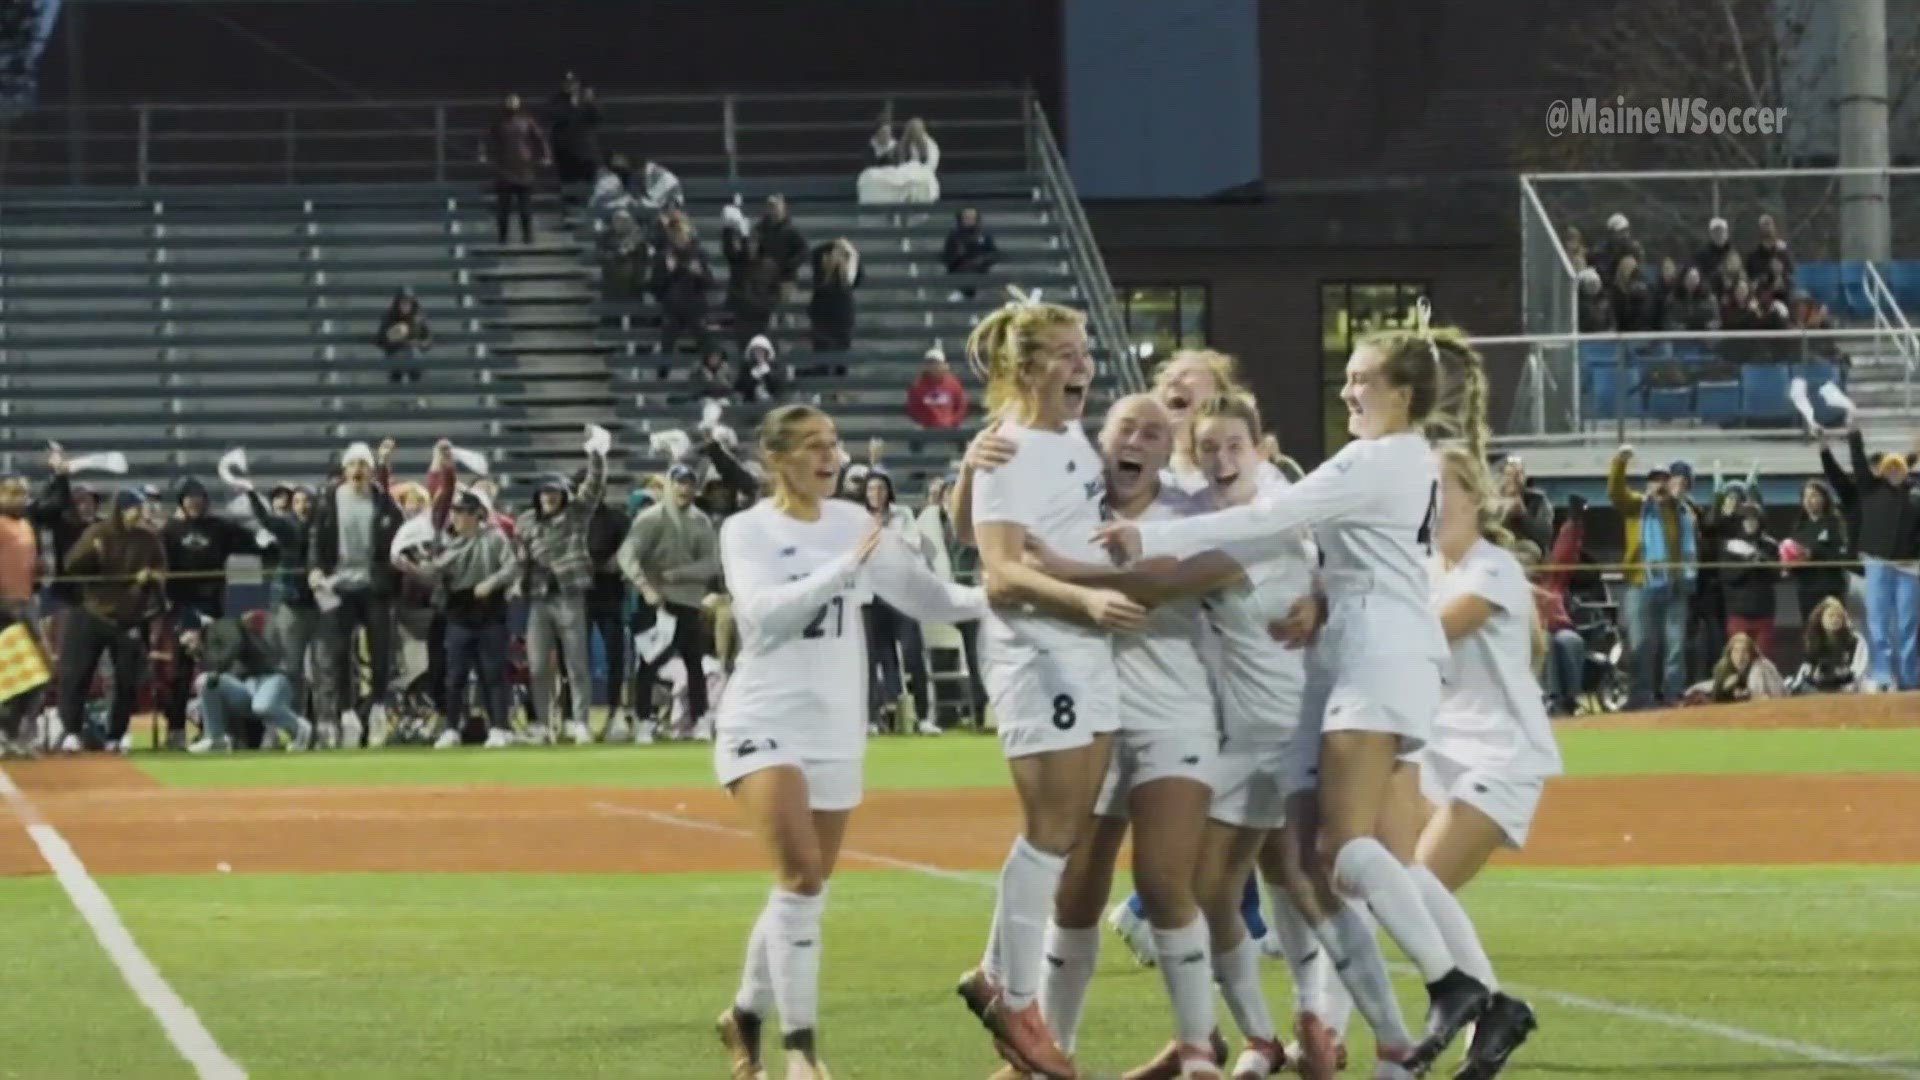 The goal from Lara Kirkby gave Maine its first ever America East championship in women's soccer in a game against UMass-Lowell.